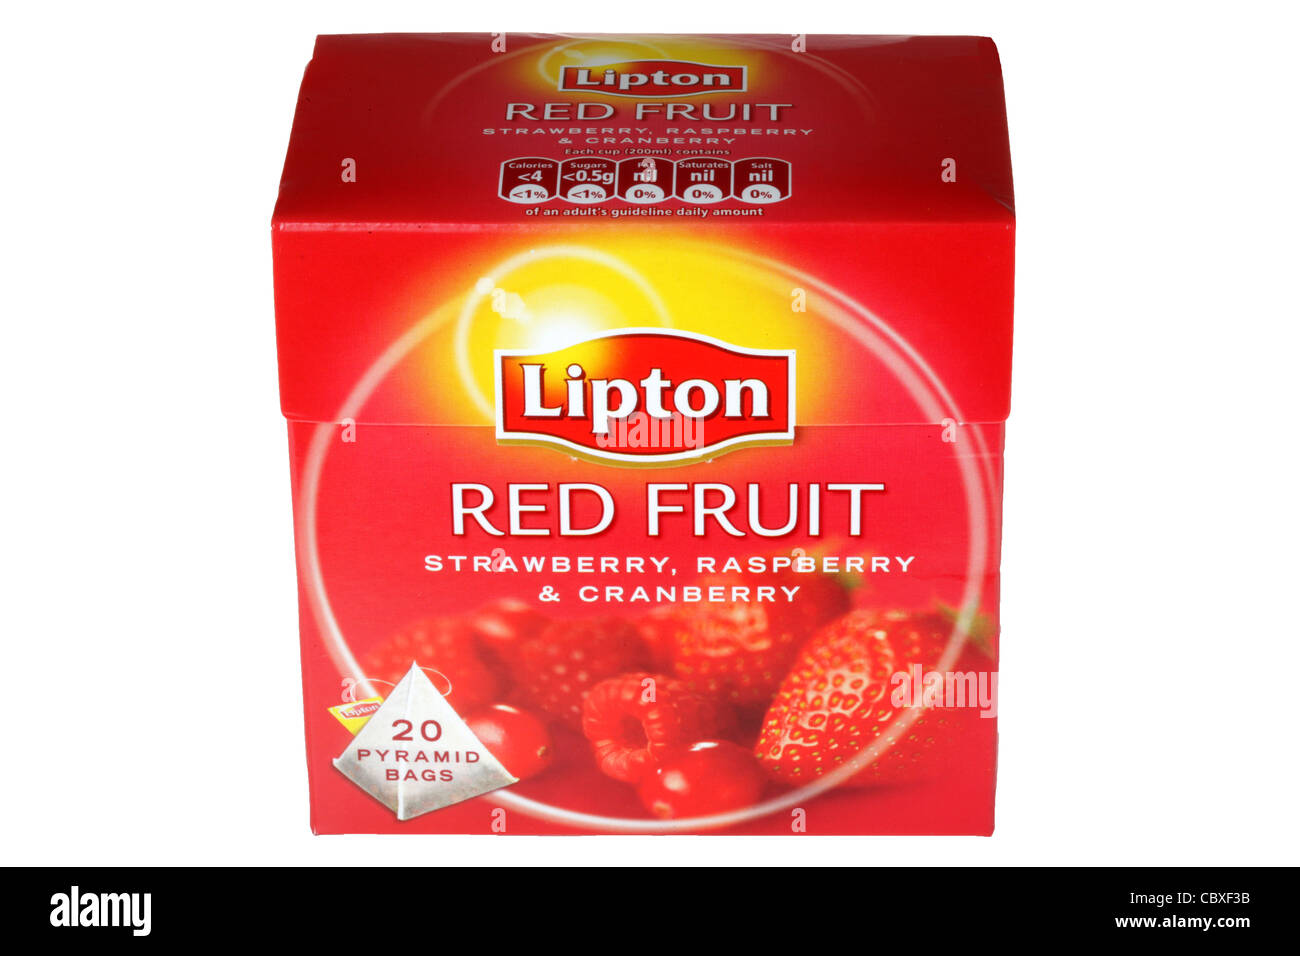 Lipton Red Fruit Tea Bags Isolated Against A White Background With No People And A Clipping Path Stock Photo